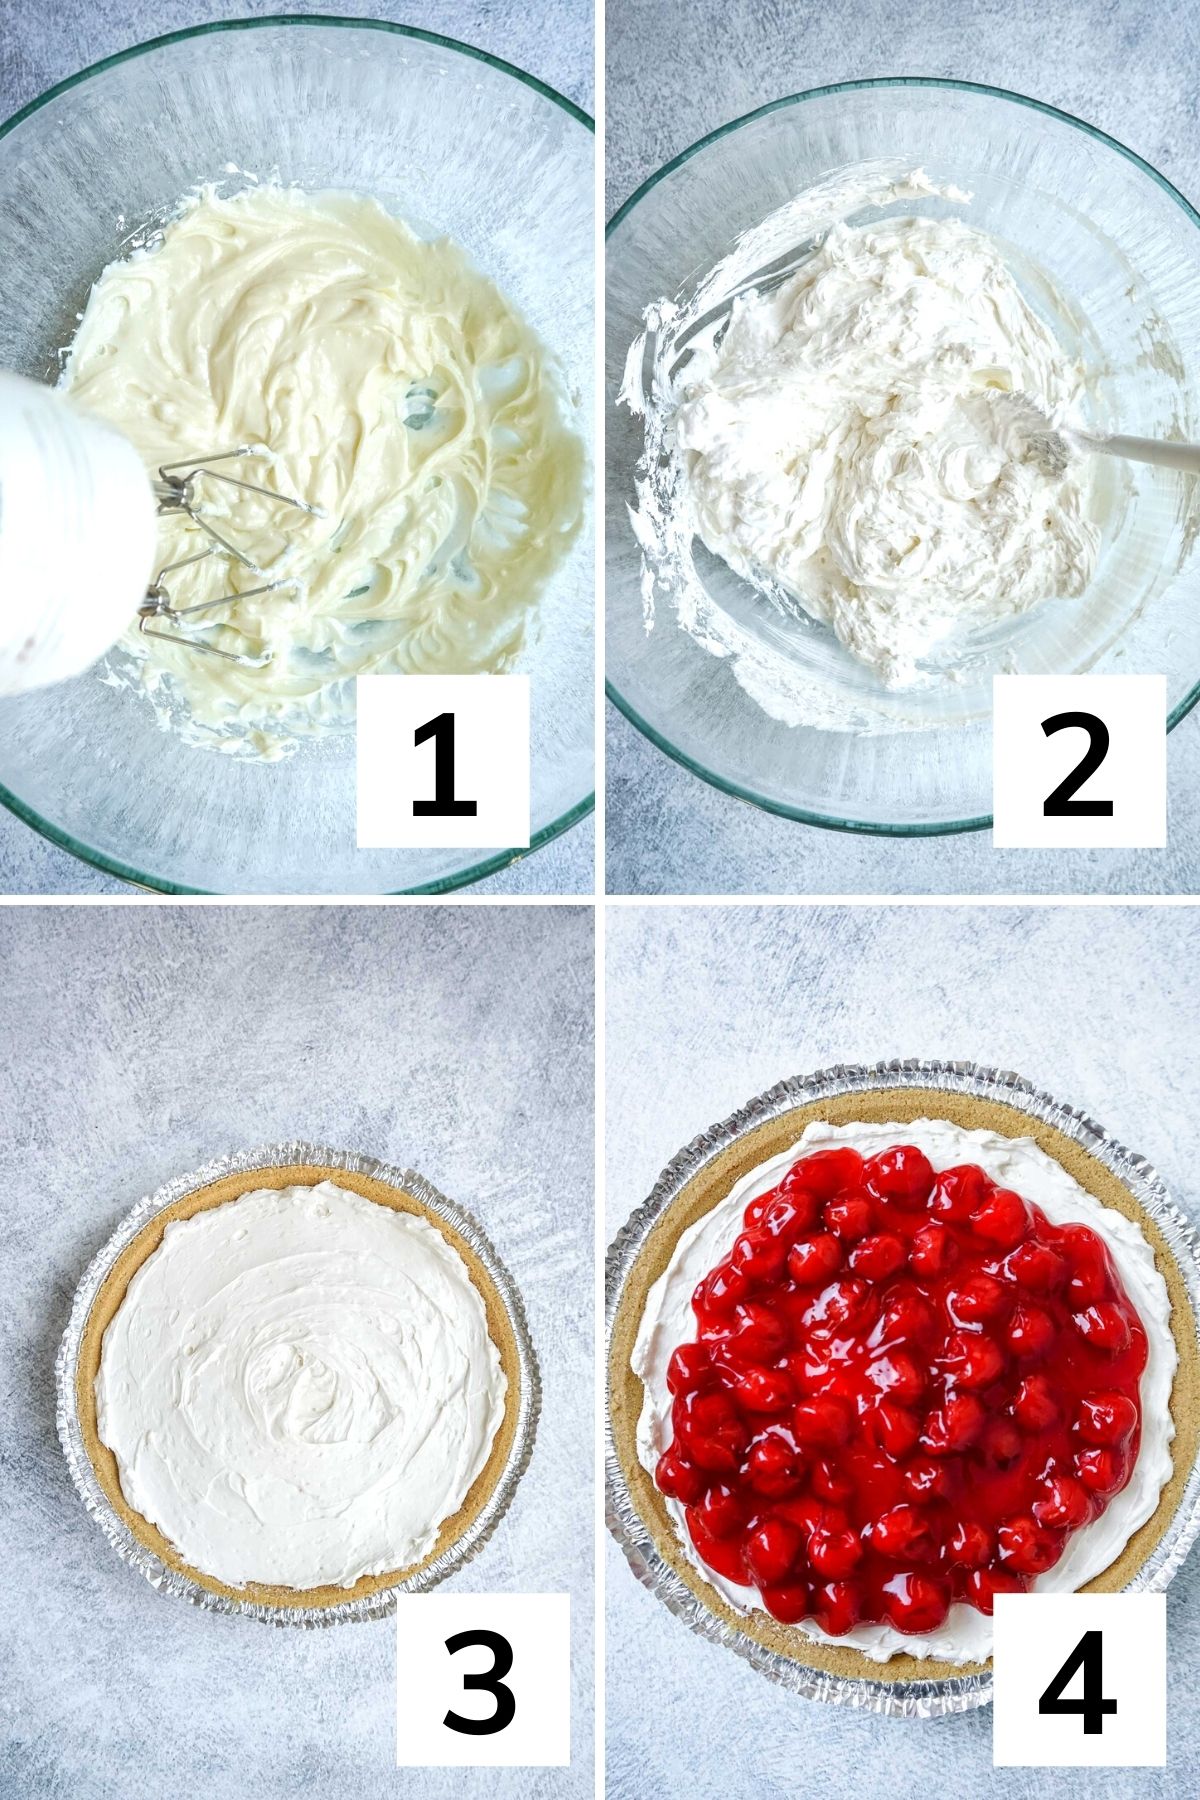 How to make cream cheese pie without condensed milk step by step.